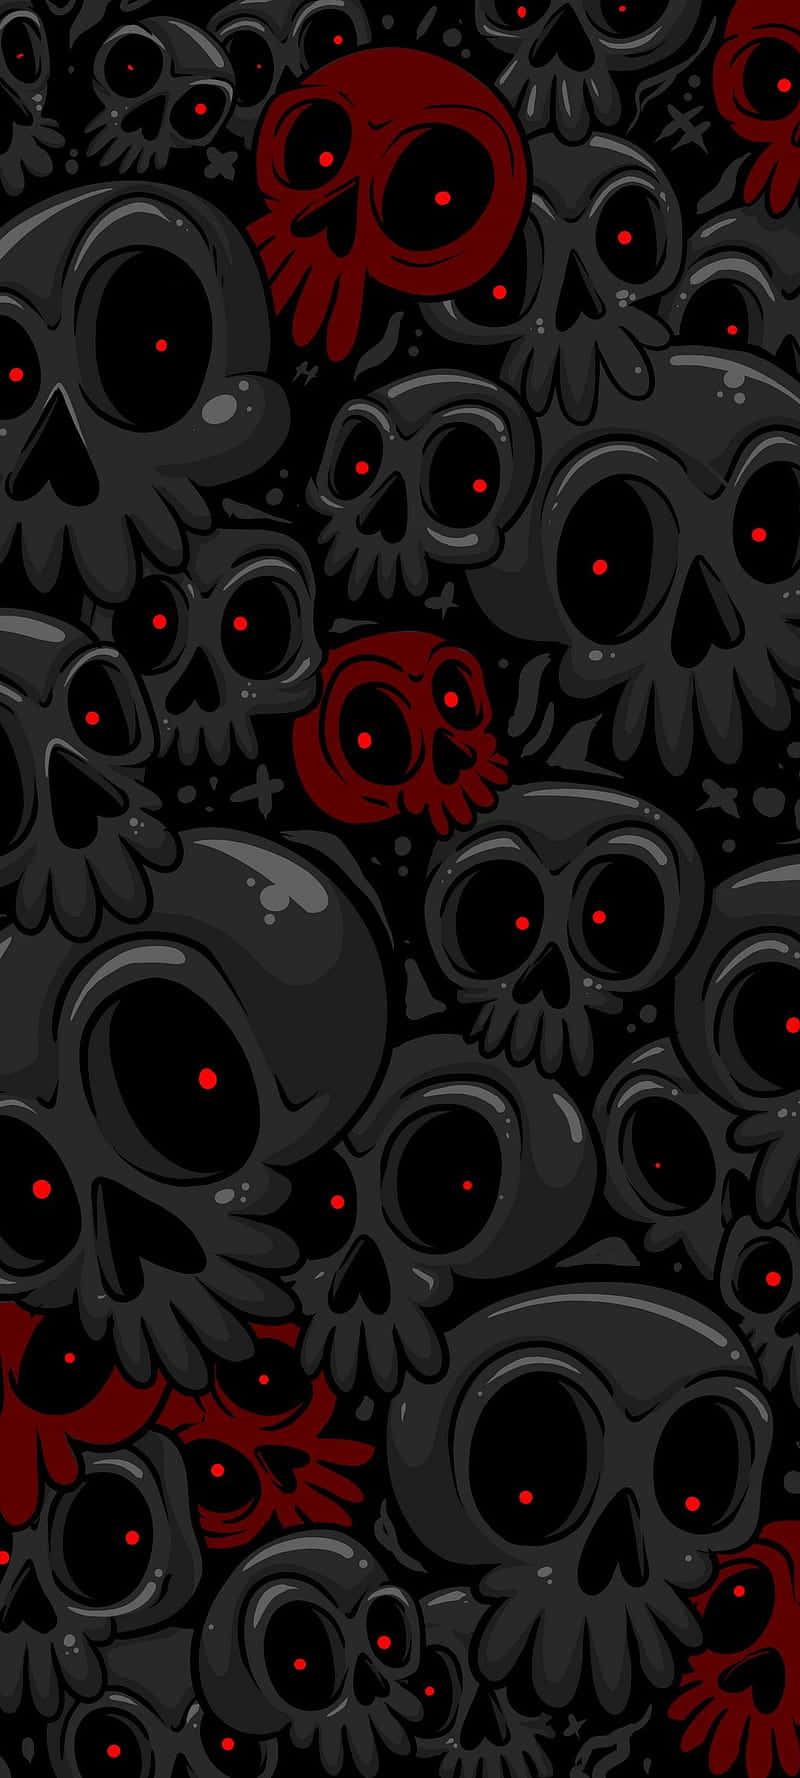 Keep your conversations secure with Skullphone. Wallpaper